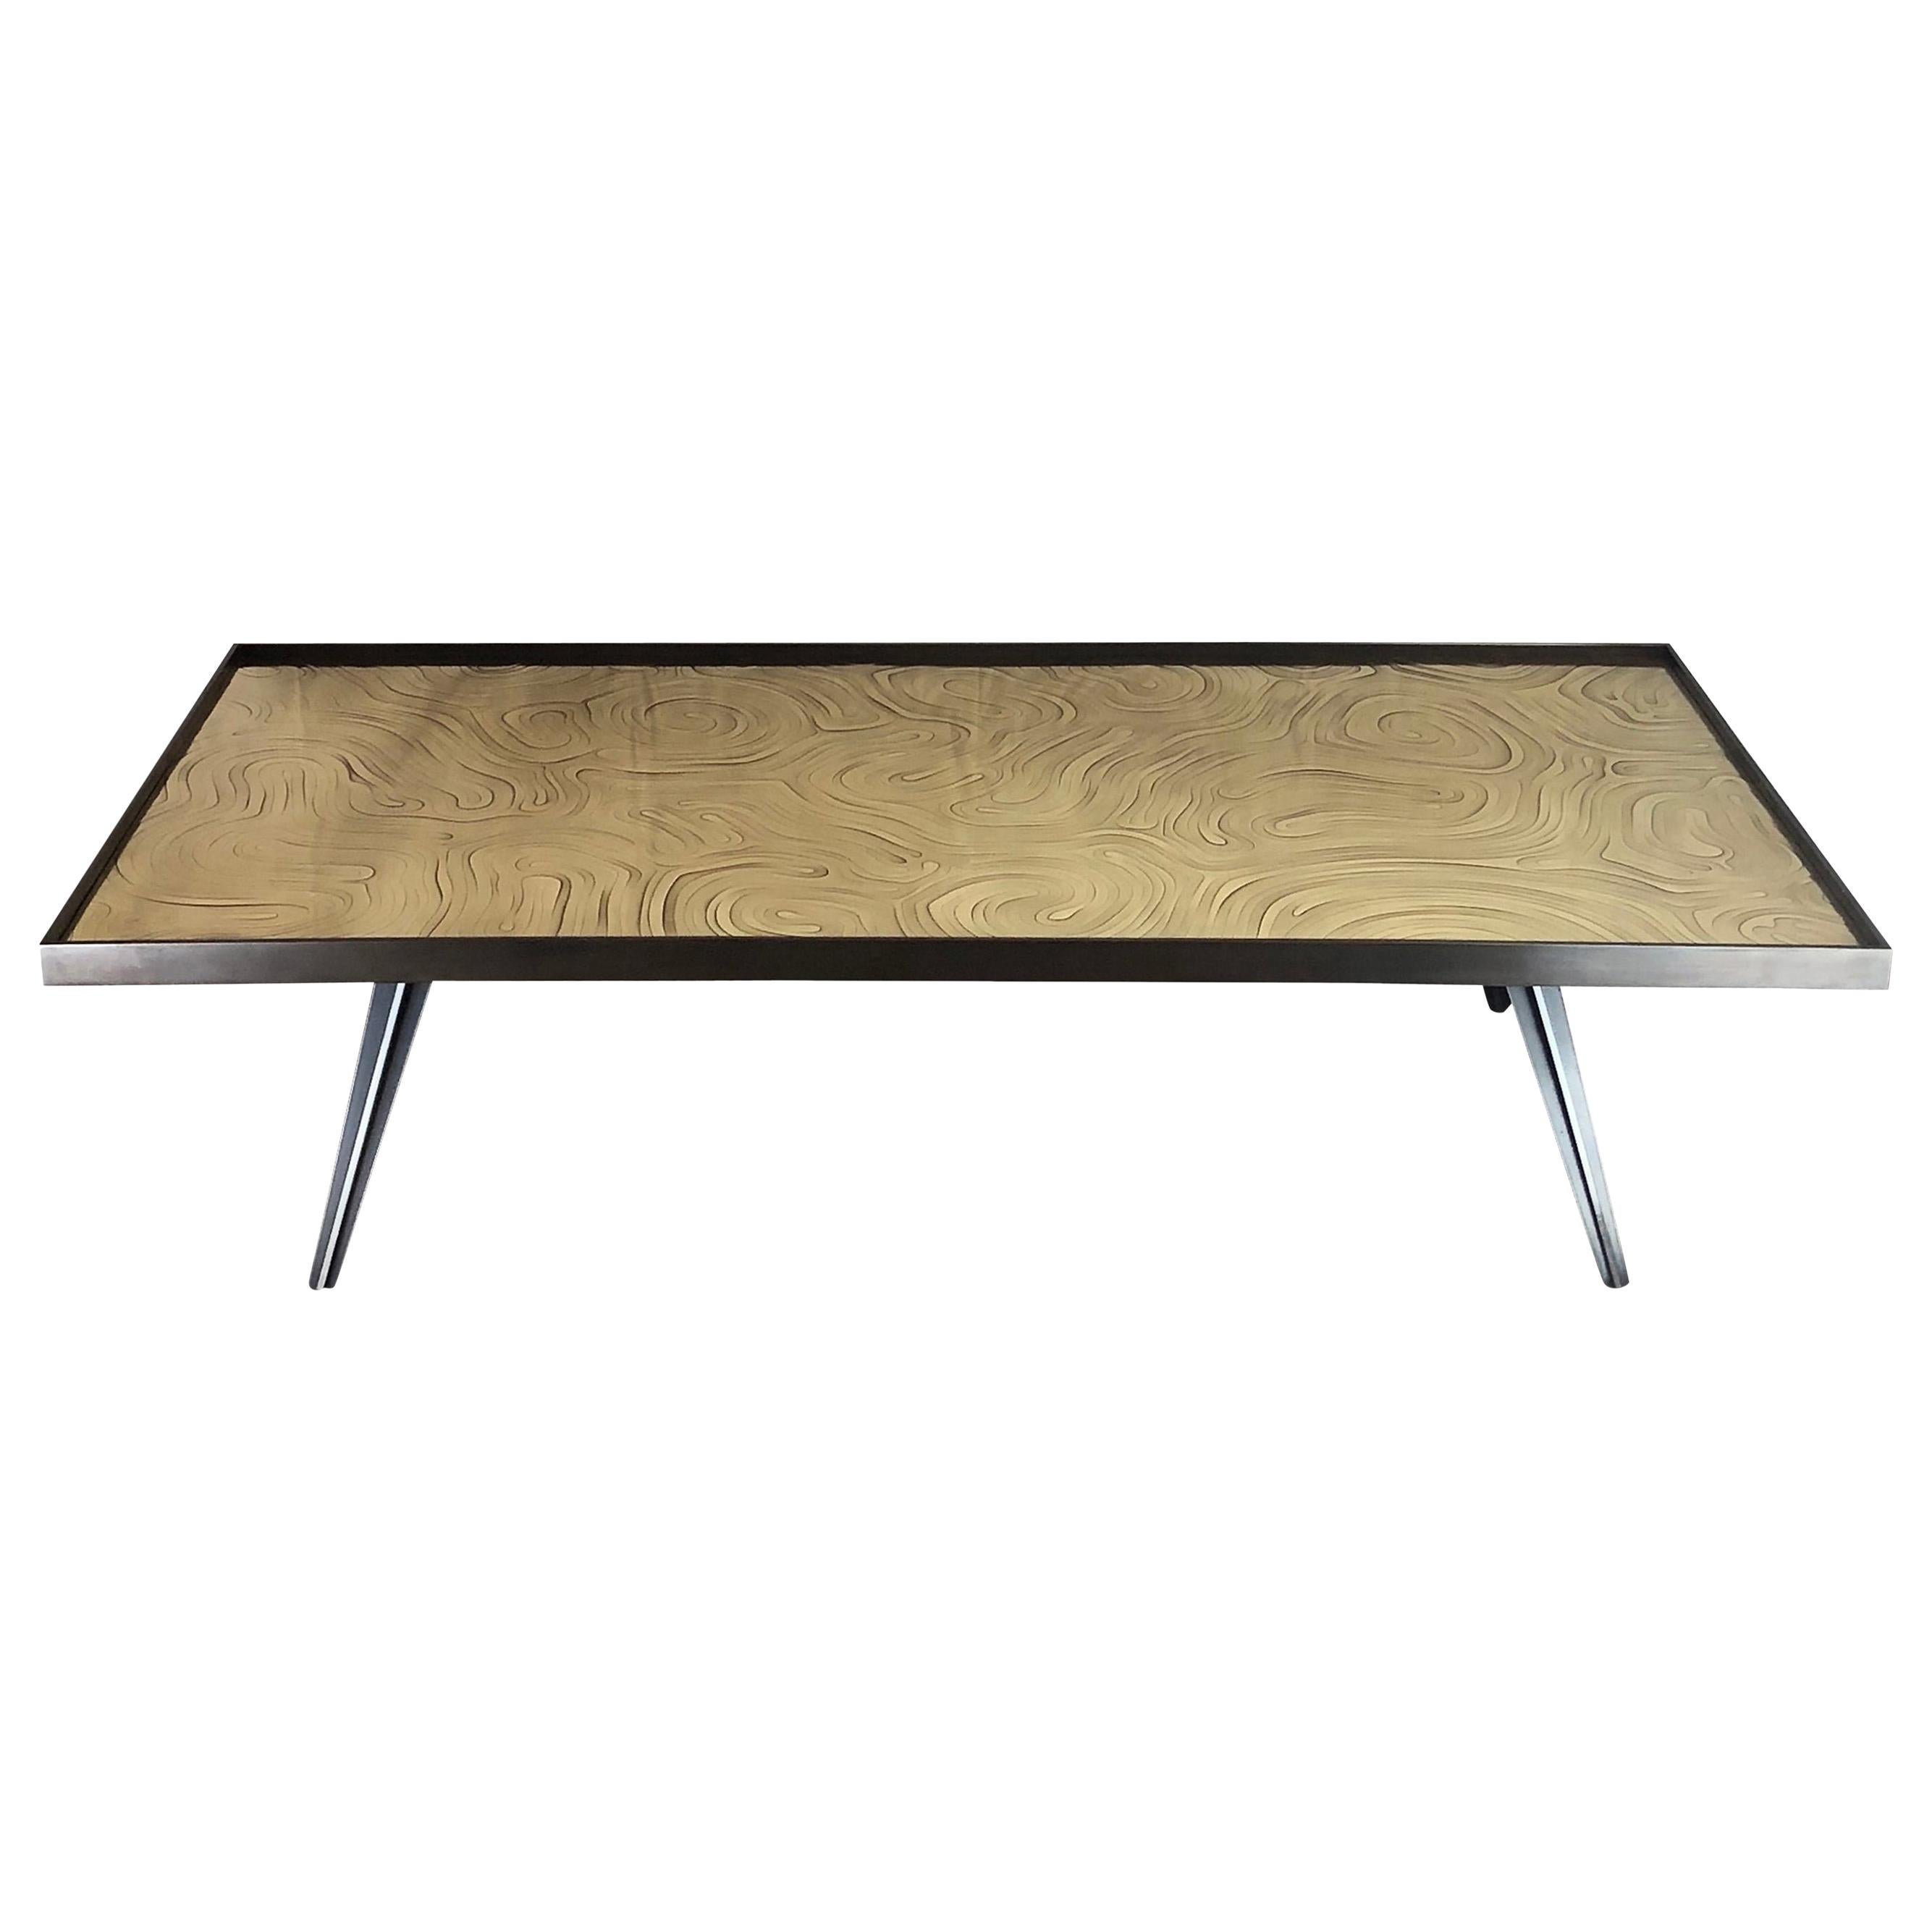 "Cholesterique" Contemporary Brass and Black Steel Coffee Table by Atelier EB